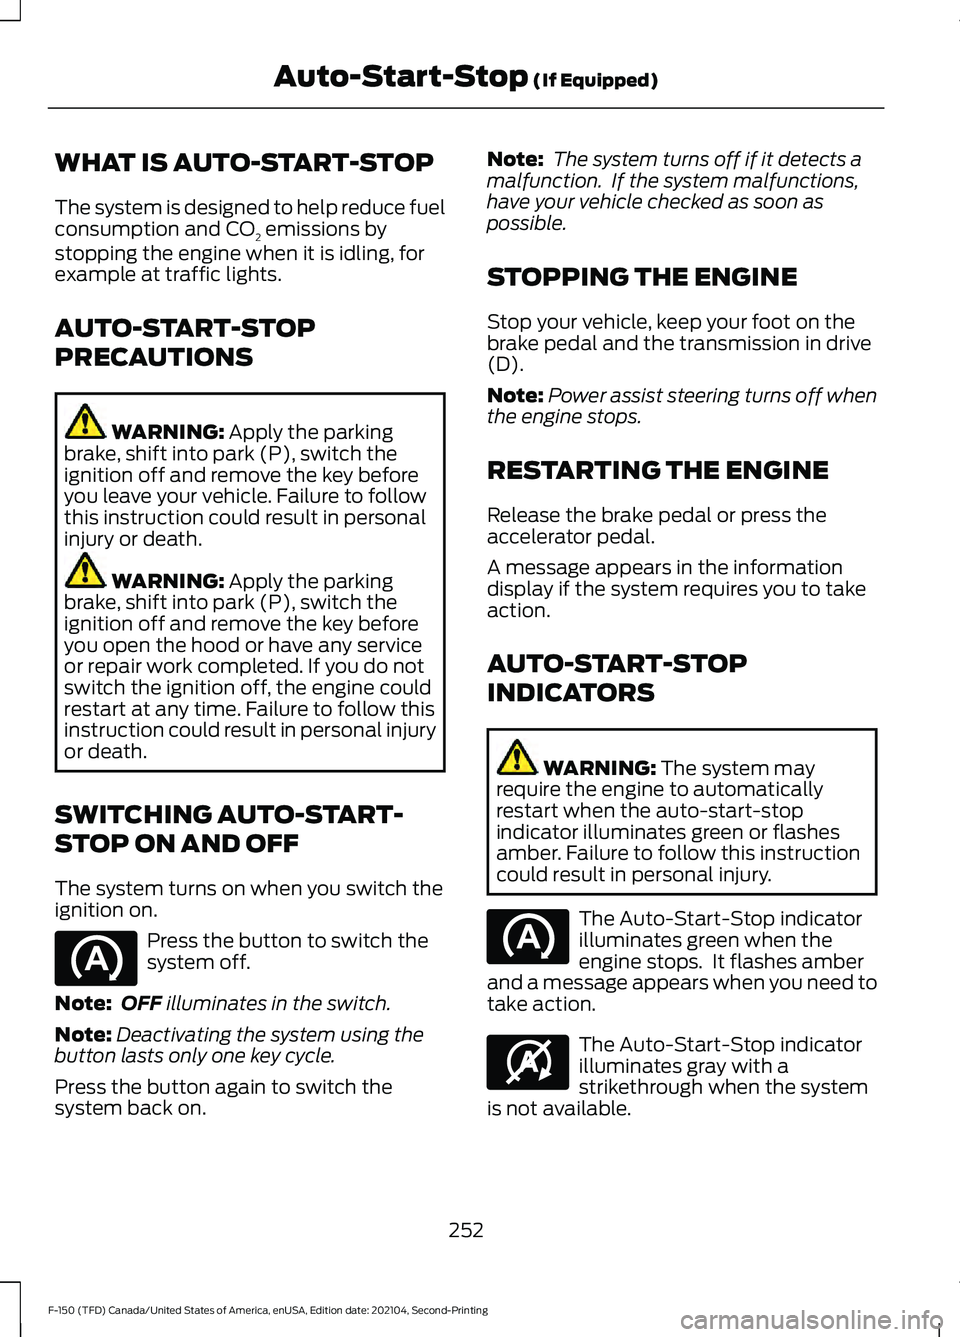 FORD F-150 2021  Owners Manual WHAT IS AUTO-START-STOP
The system is designed to help reduce fuel
consumption and CO
2 emissions by
stopping the engine when it is idling, for
example at traffic lights.
AUTO-START-STOP
PRECAUTIONS W